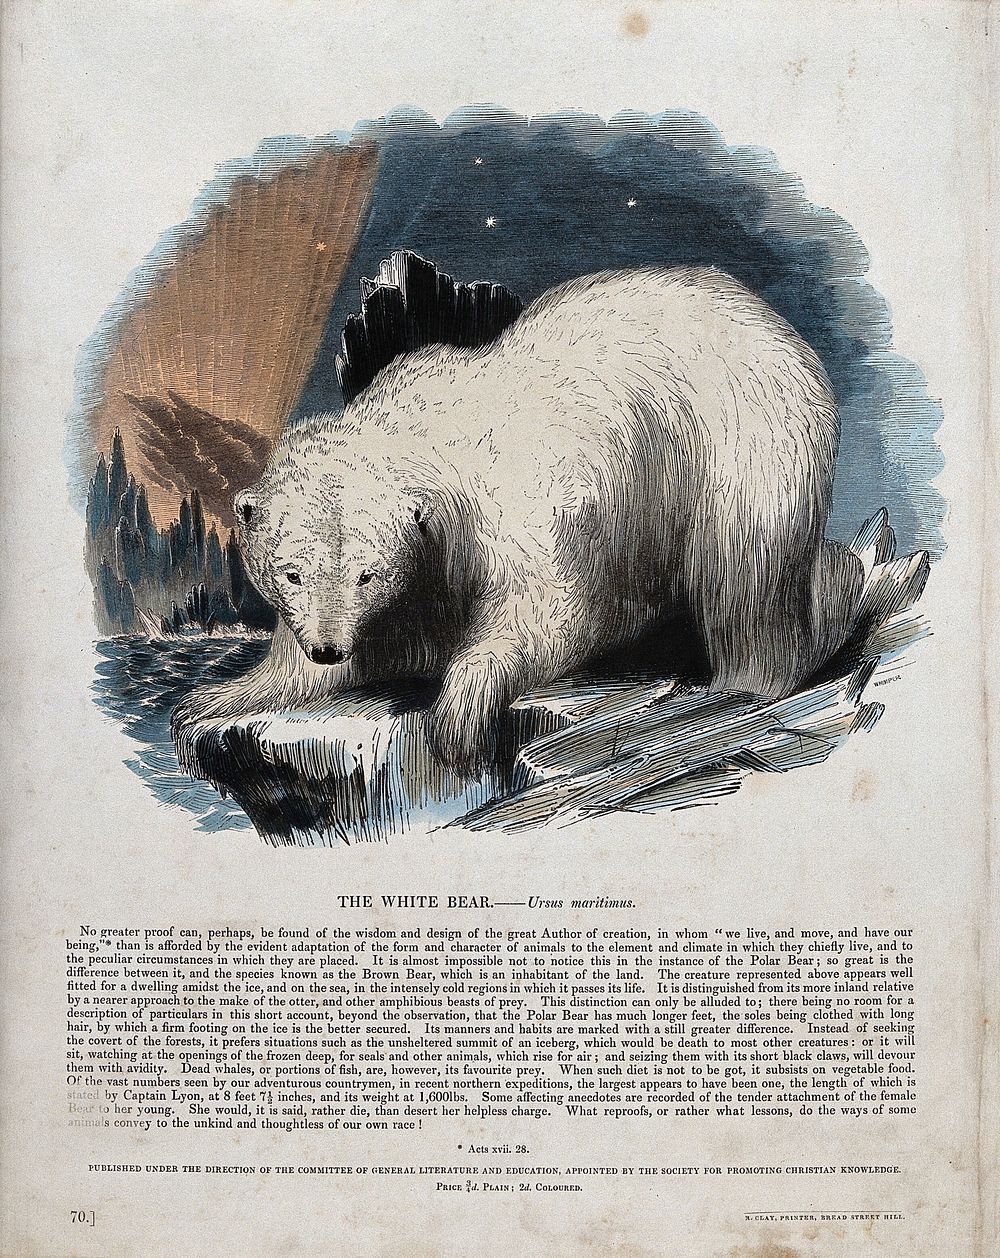 A white bear (Polar bear) standing on an ice floe. Coloured wood engraving by J. W. Whimper.